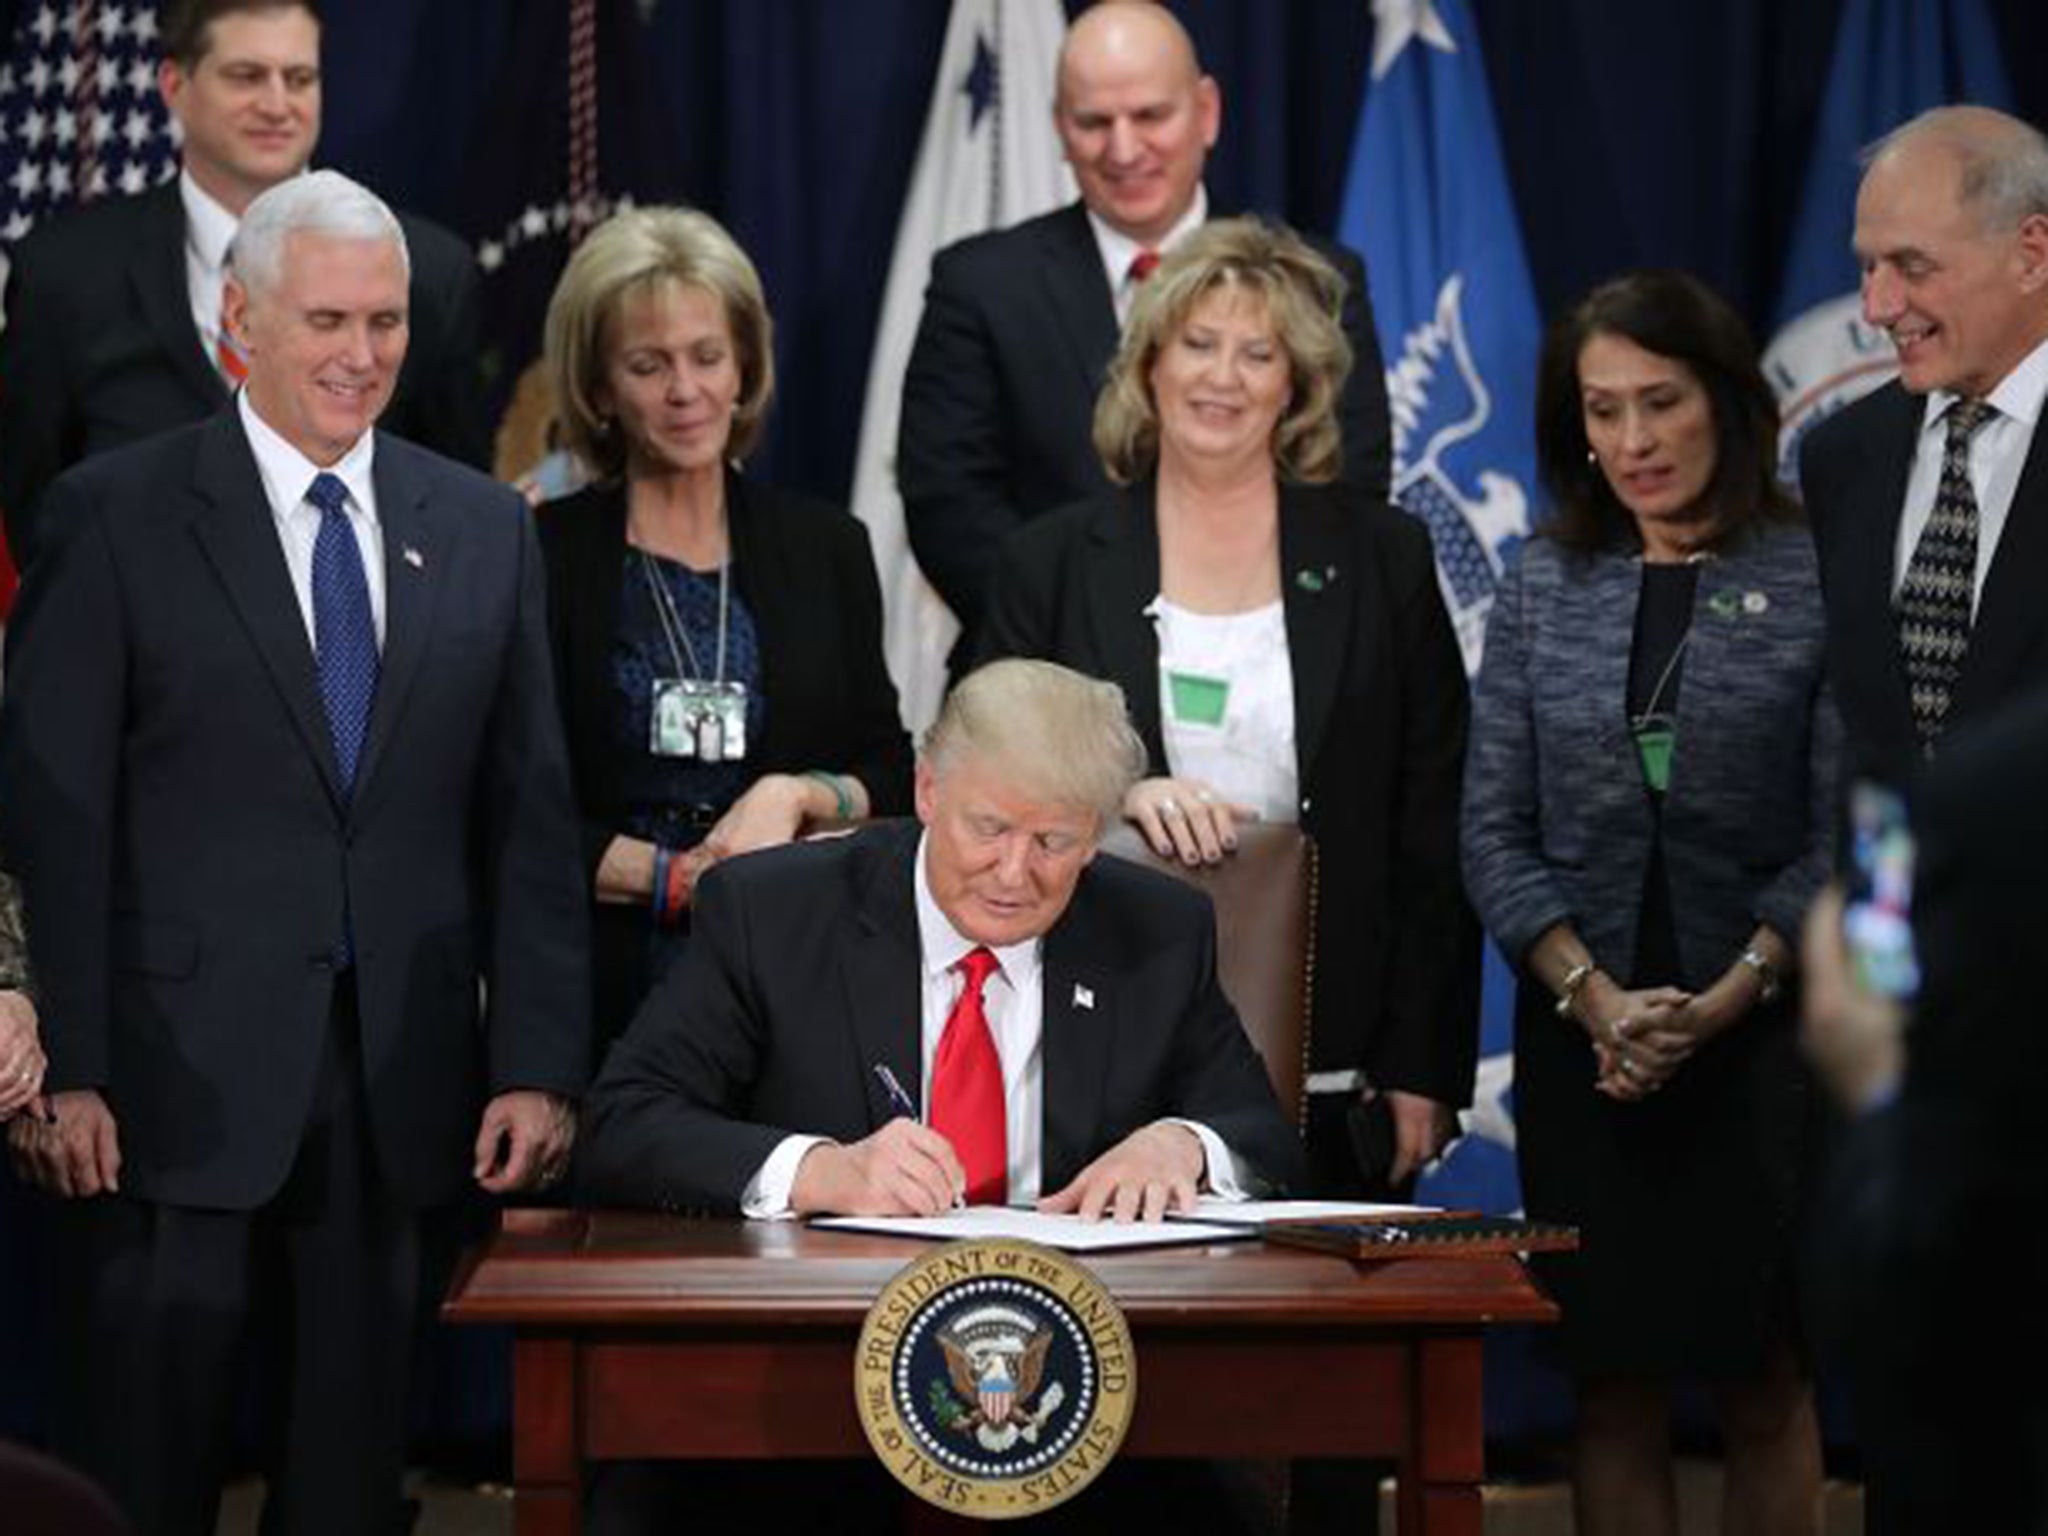 The US President signed a number of his most extreme immigration policies into law on Wednesday